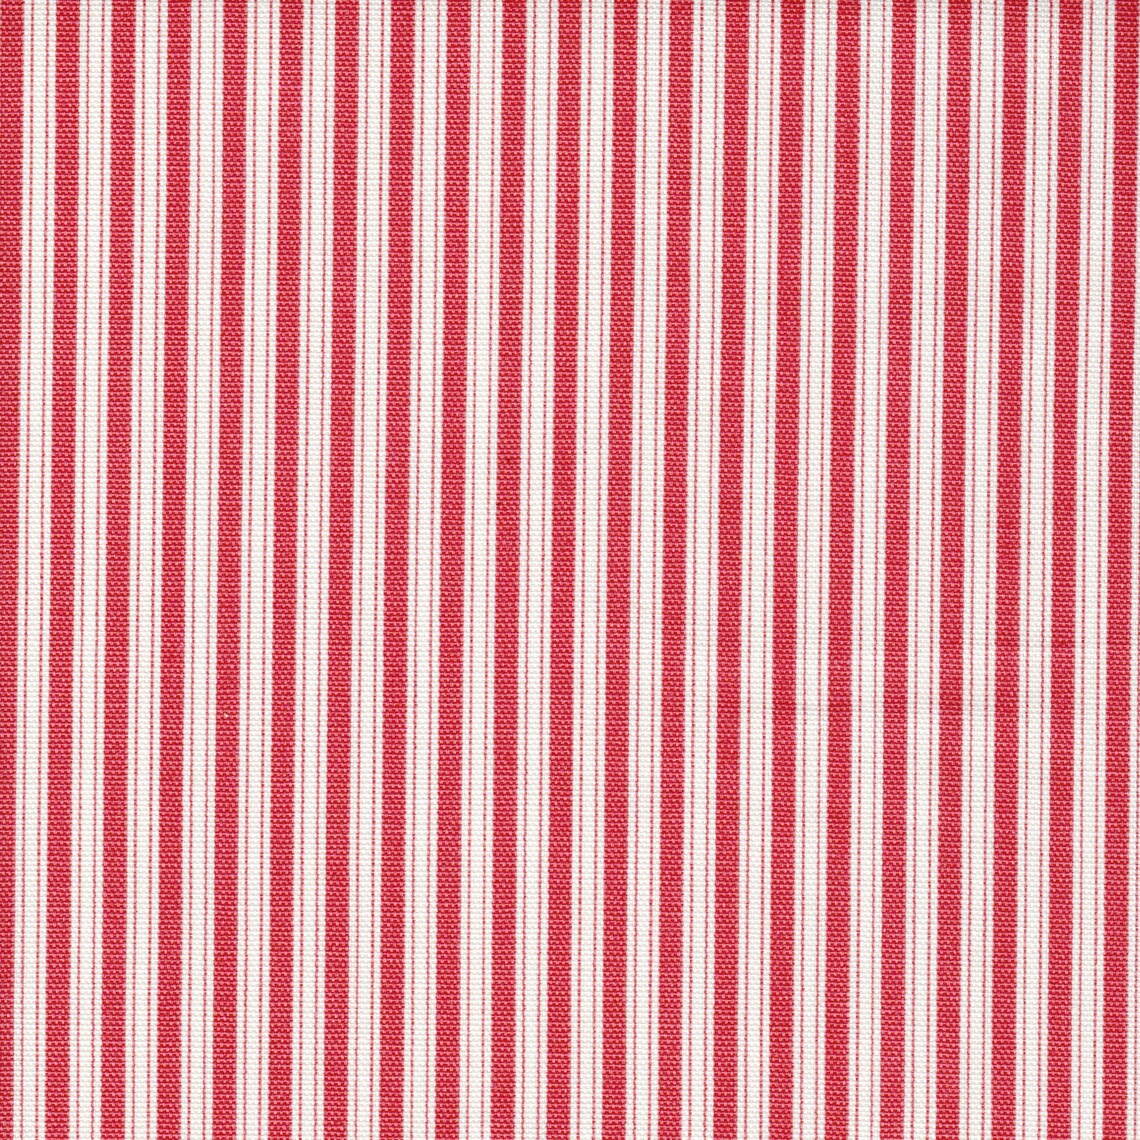 rod pocket curtain panels pair in Polo Calypso Rose Red Stripe on Off-White